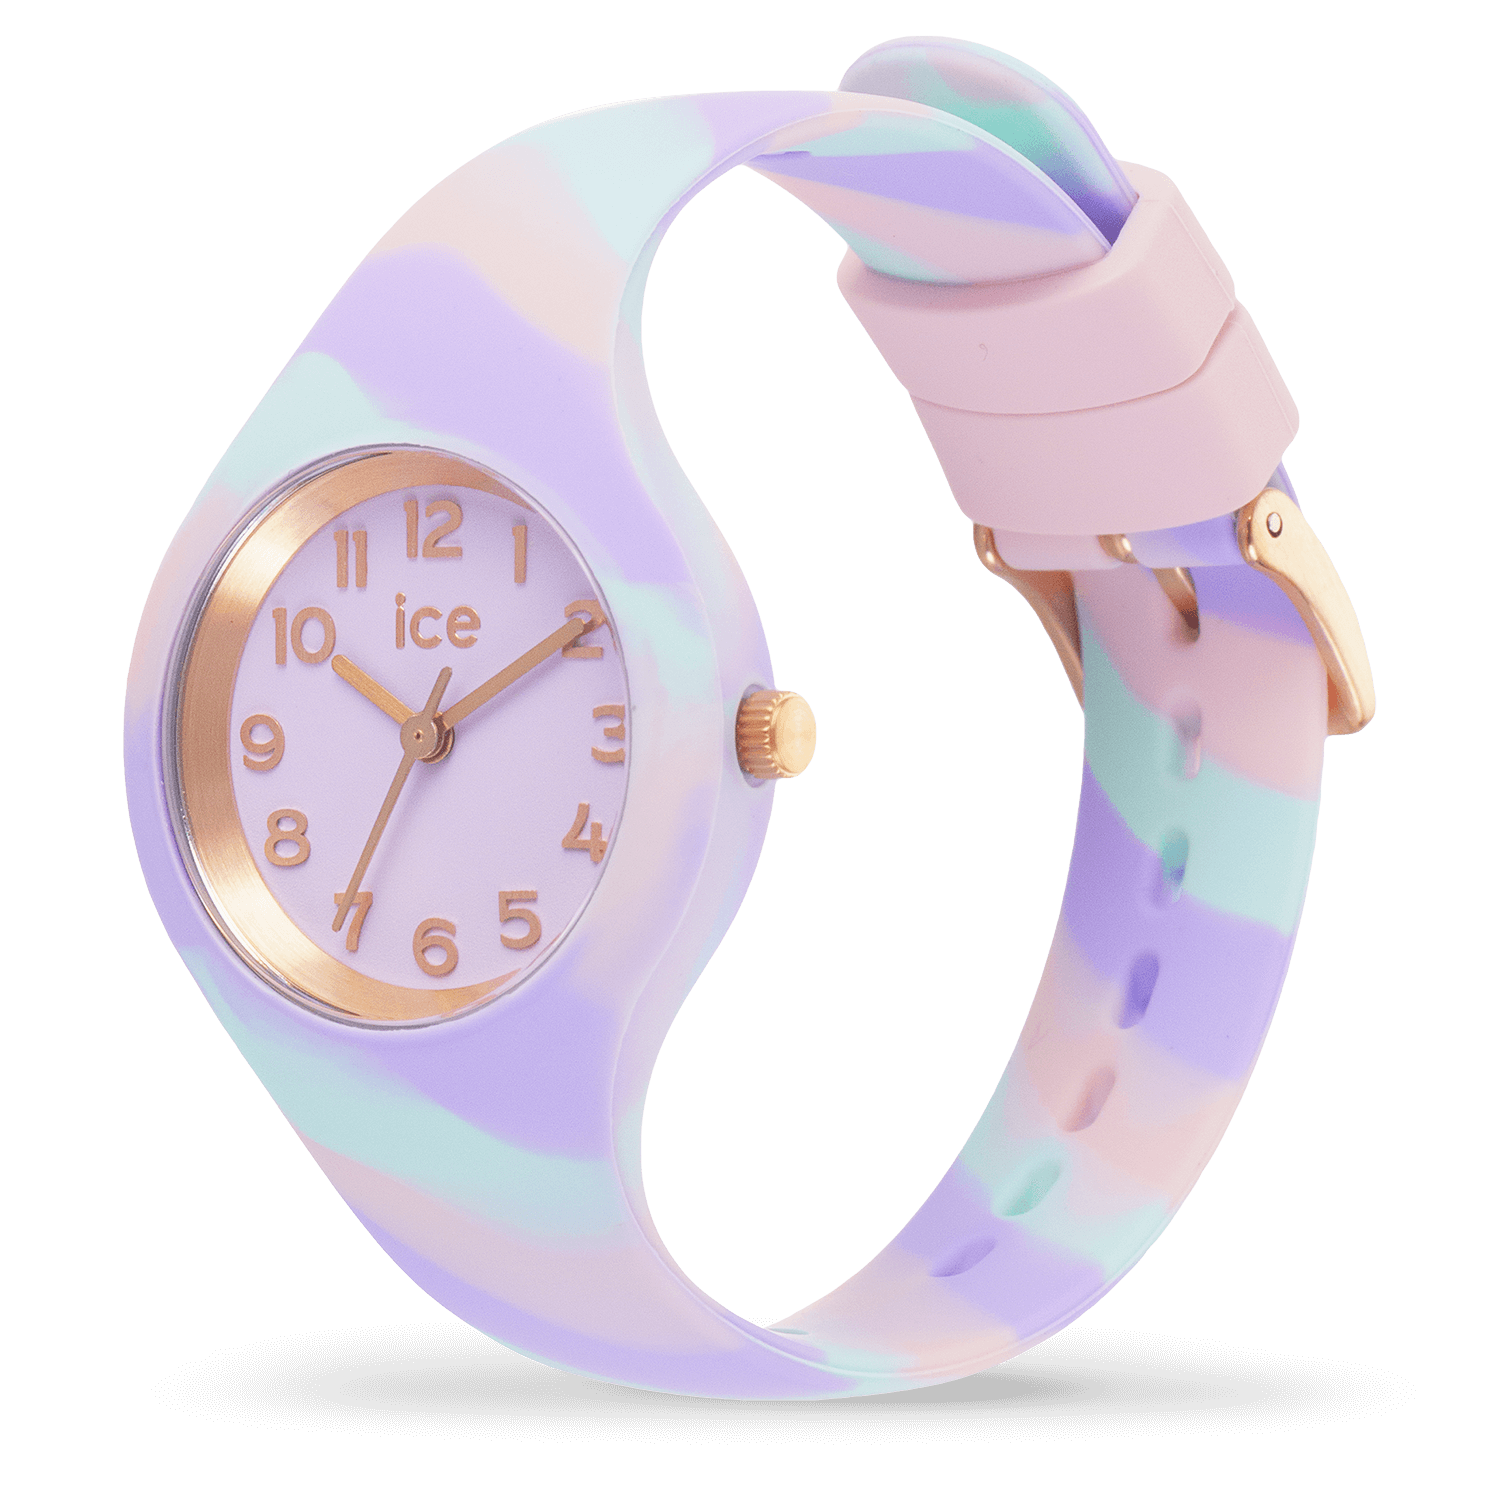 tie • dye ICE and Lilac Sweet Ice-Watch